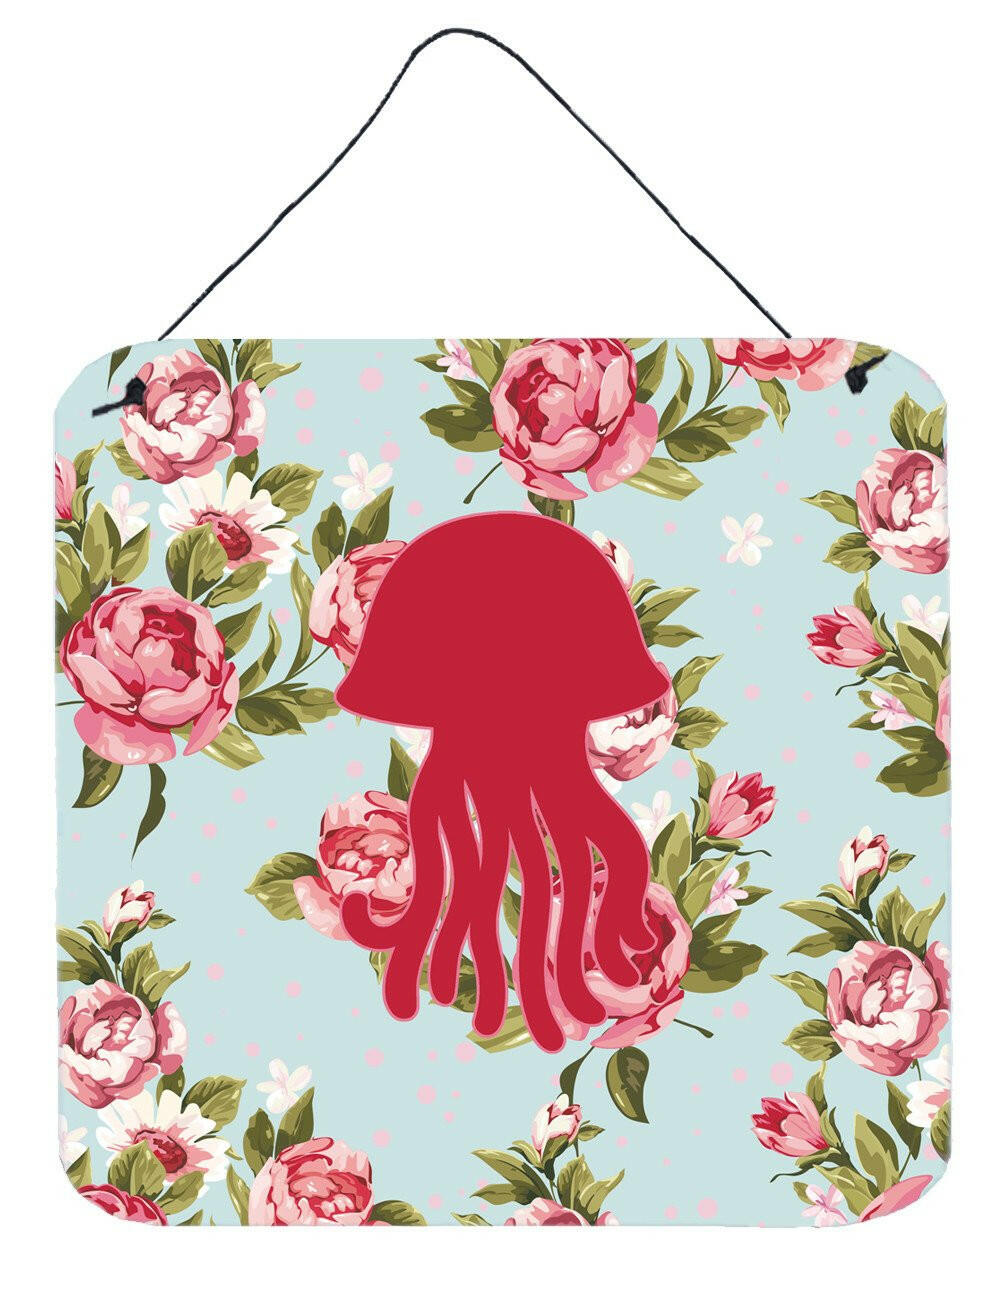 Jellyfish Shabby Chic Blue Roses Wall or Door Hanging Prints BB1091 by Caroline's Treasures